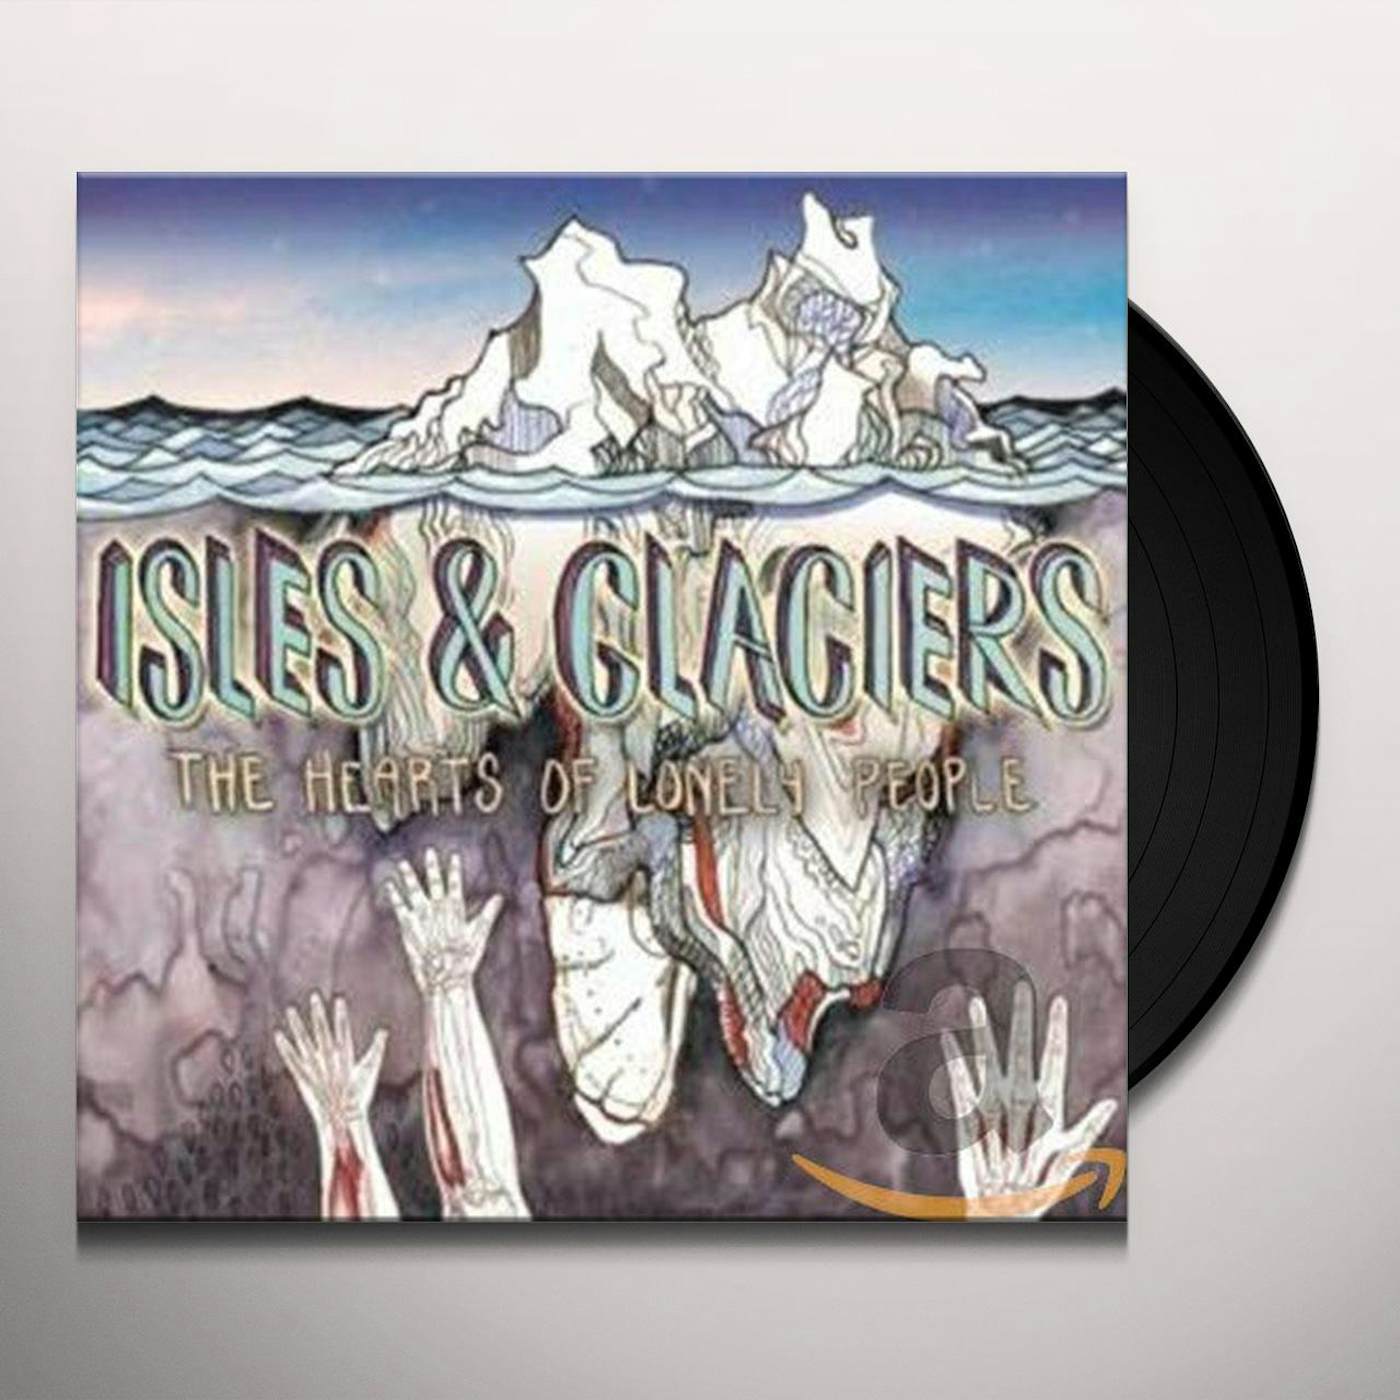 Isles & Glaciers The Hearts Of Lonely People (Remixes) Vinyl Record